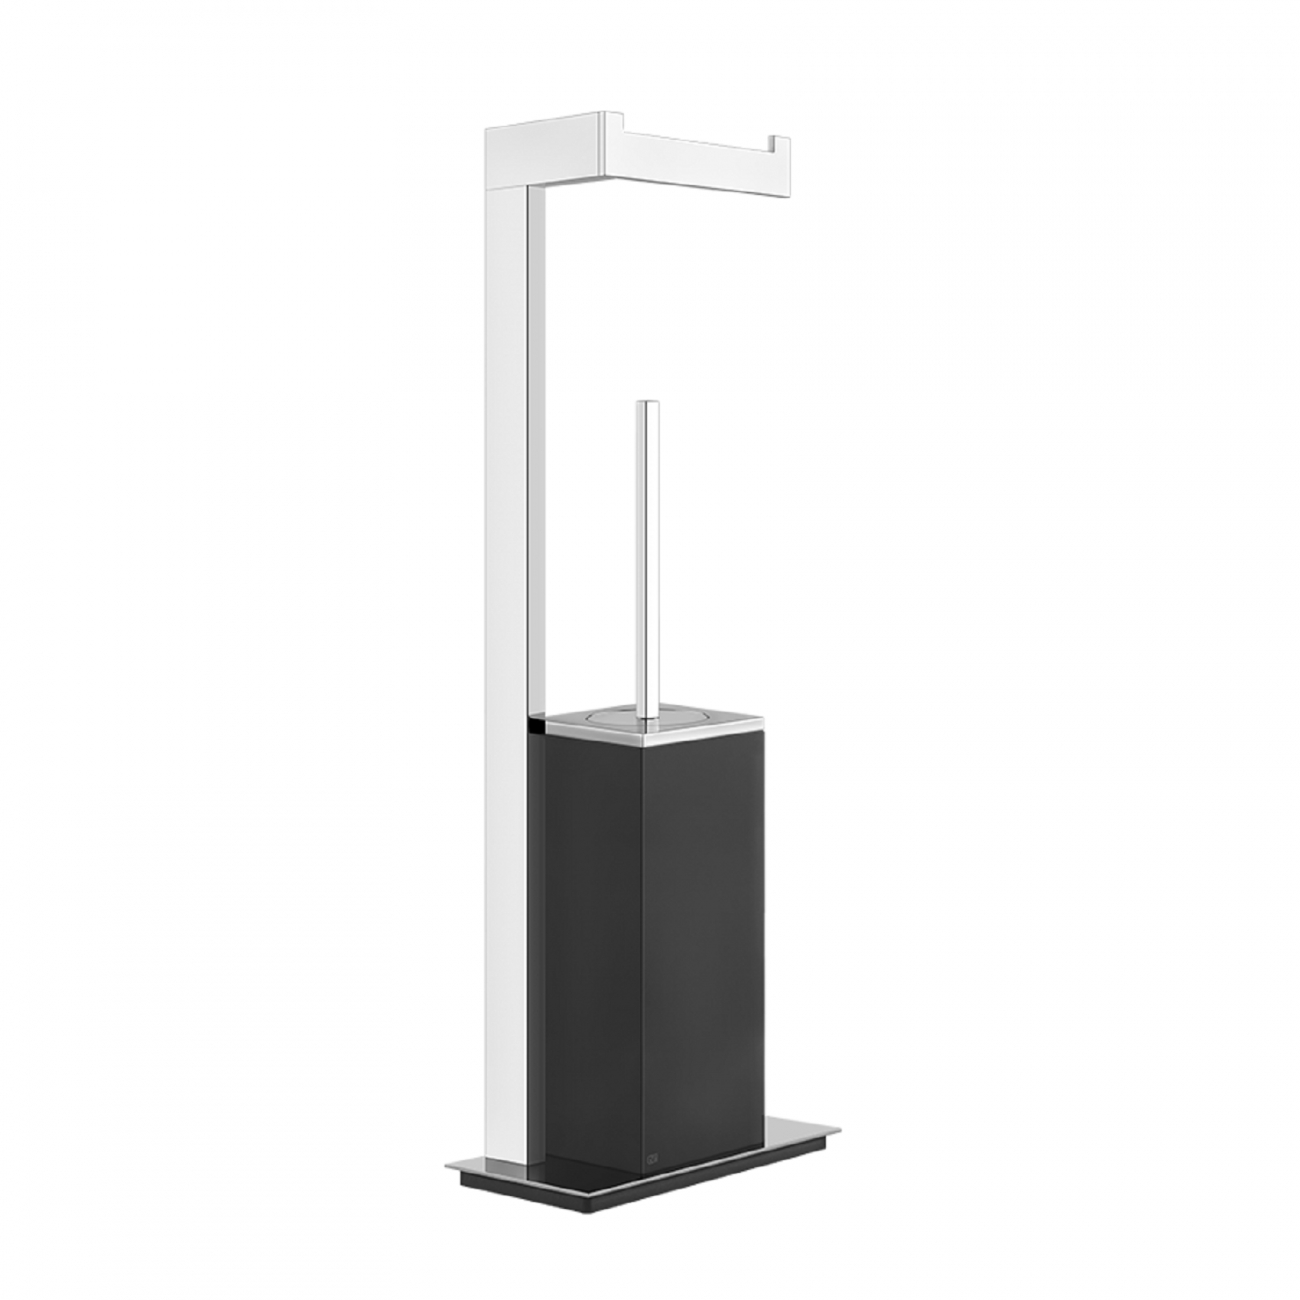 GESSI RETTANGOLO STANDING SET WITH BRUSH AND PAPER ROLL HOLDER